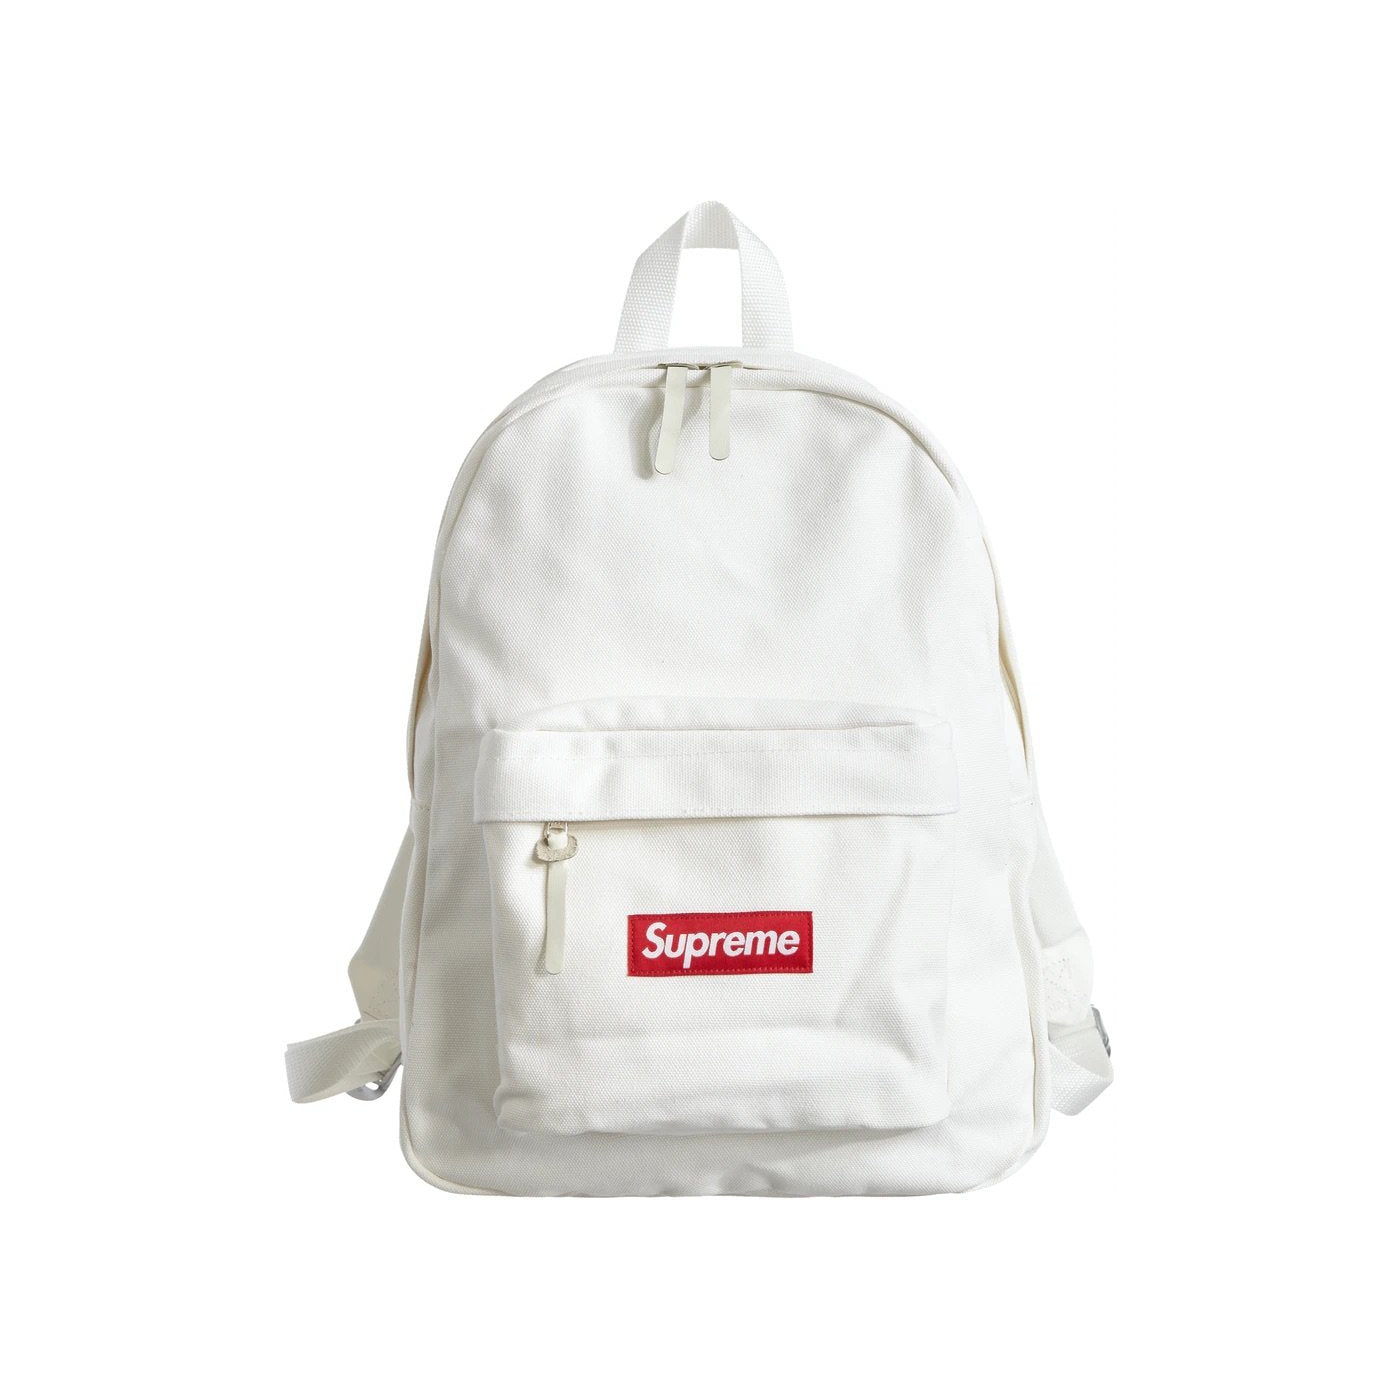 Supreme Canvas Backpack "White" - Centrall Online